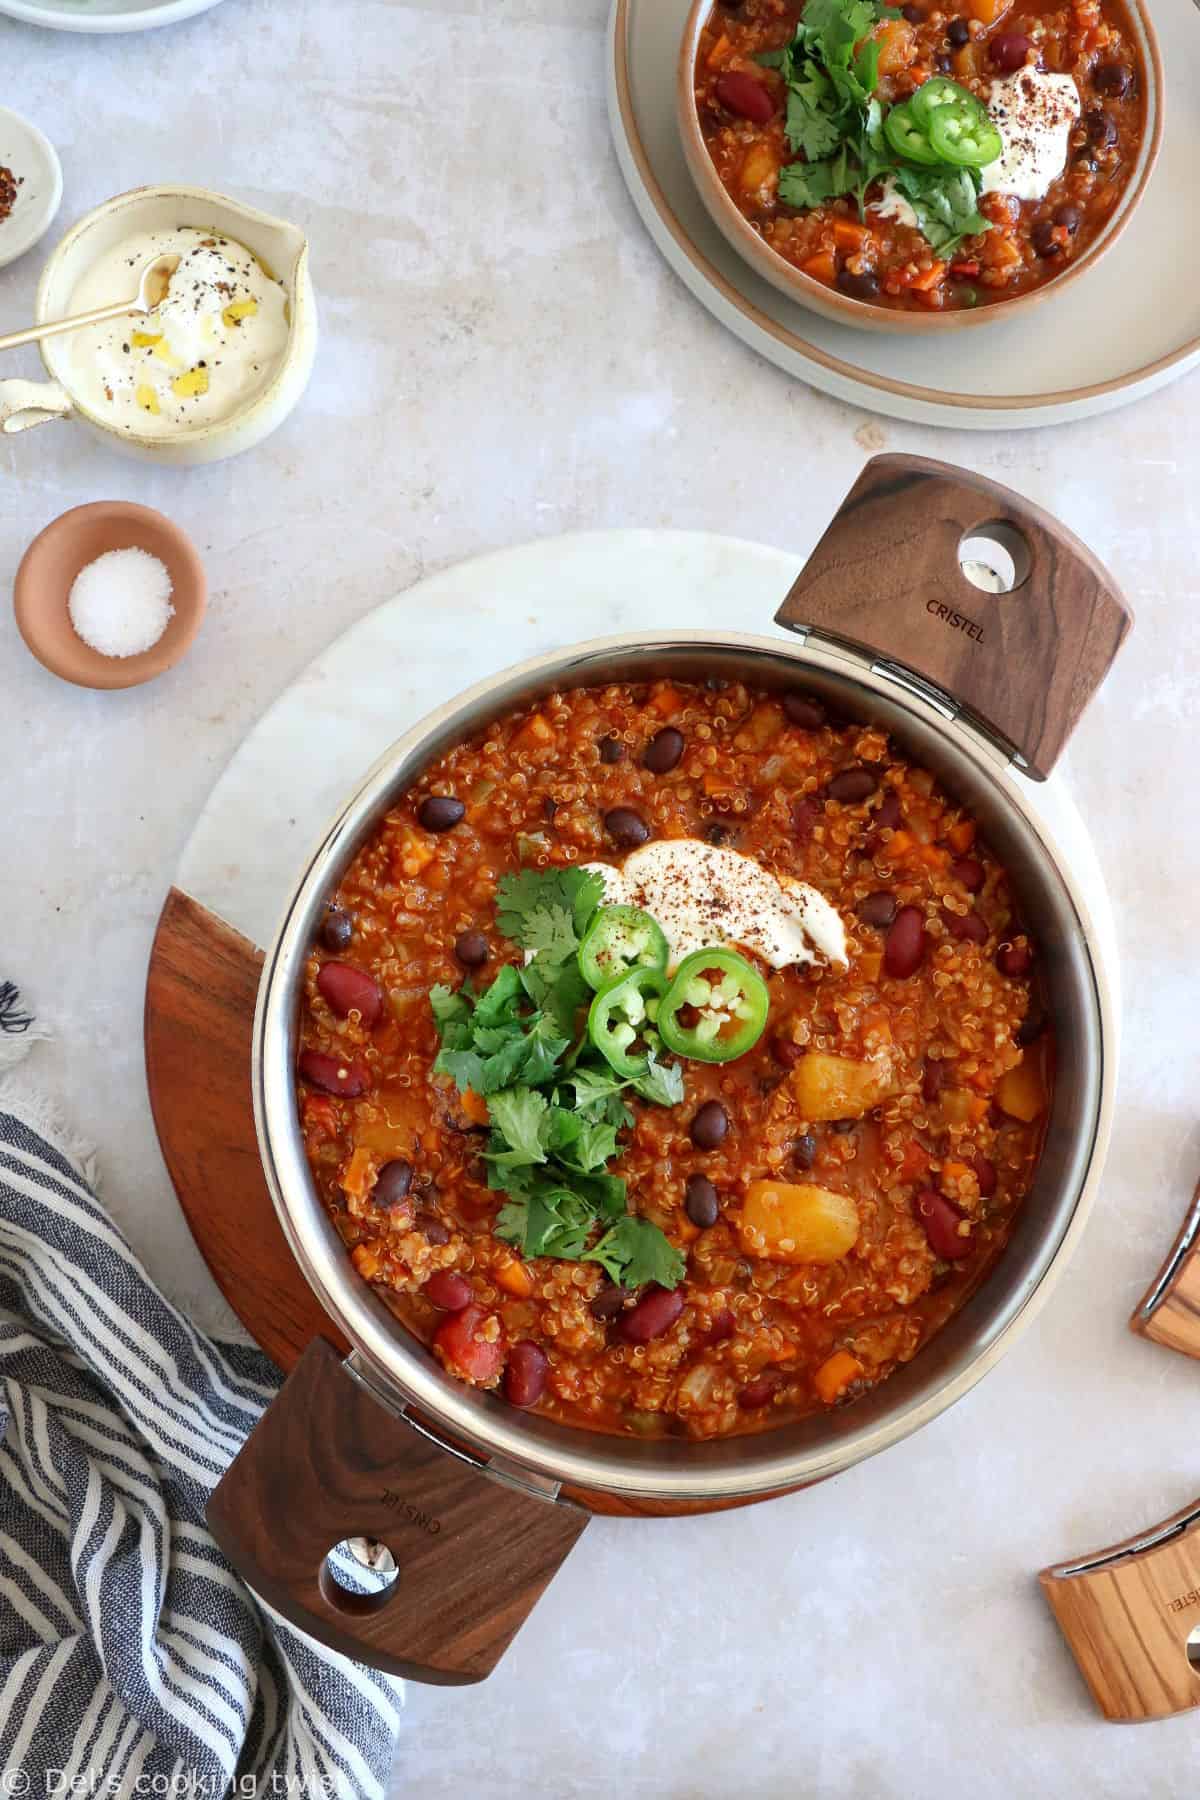 This vegetarian butternut squash quinoa chili is hearty, healthy and very satisfying. It features chunks of butternut squash, black beans, and quinoa for some additional texture.